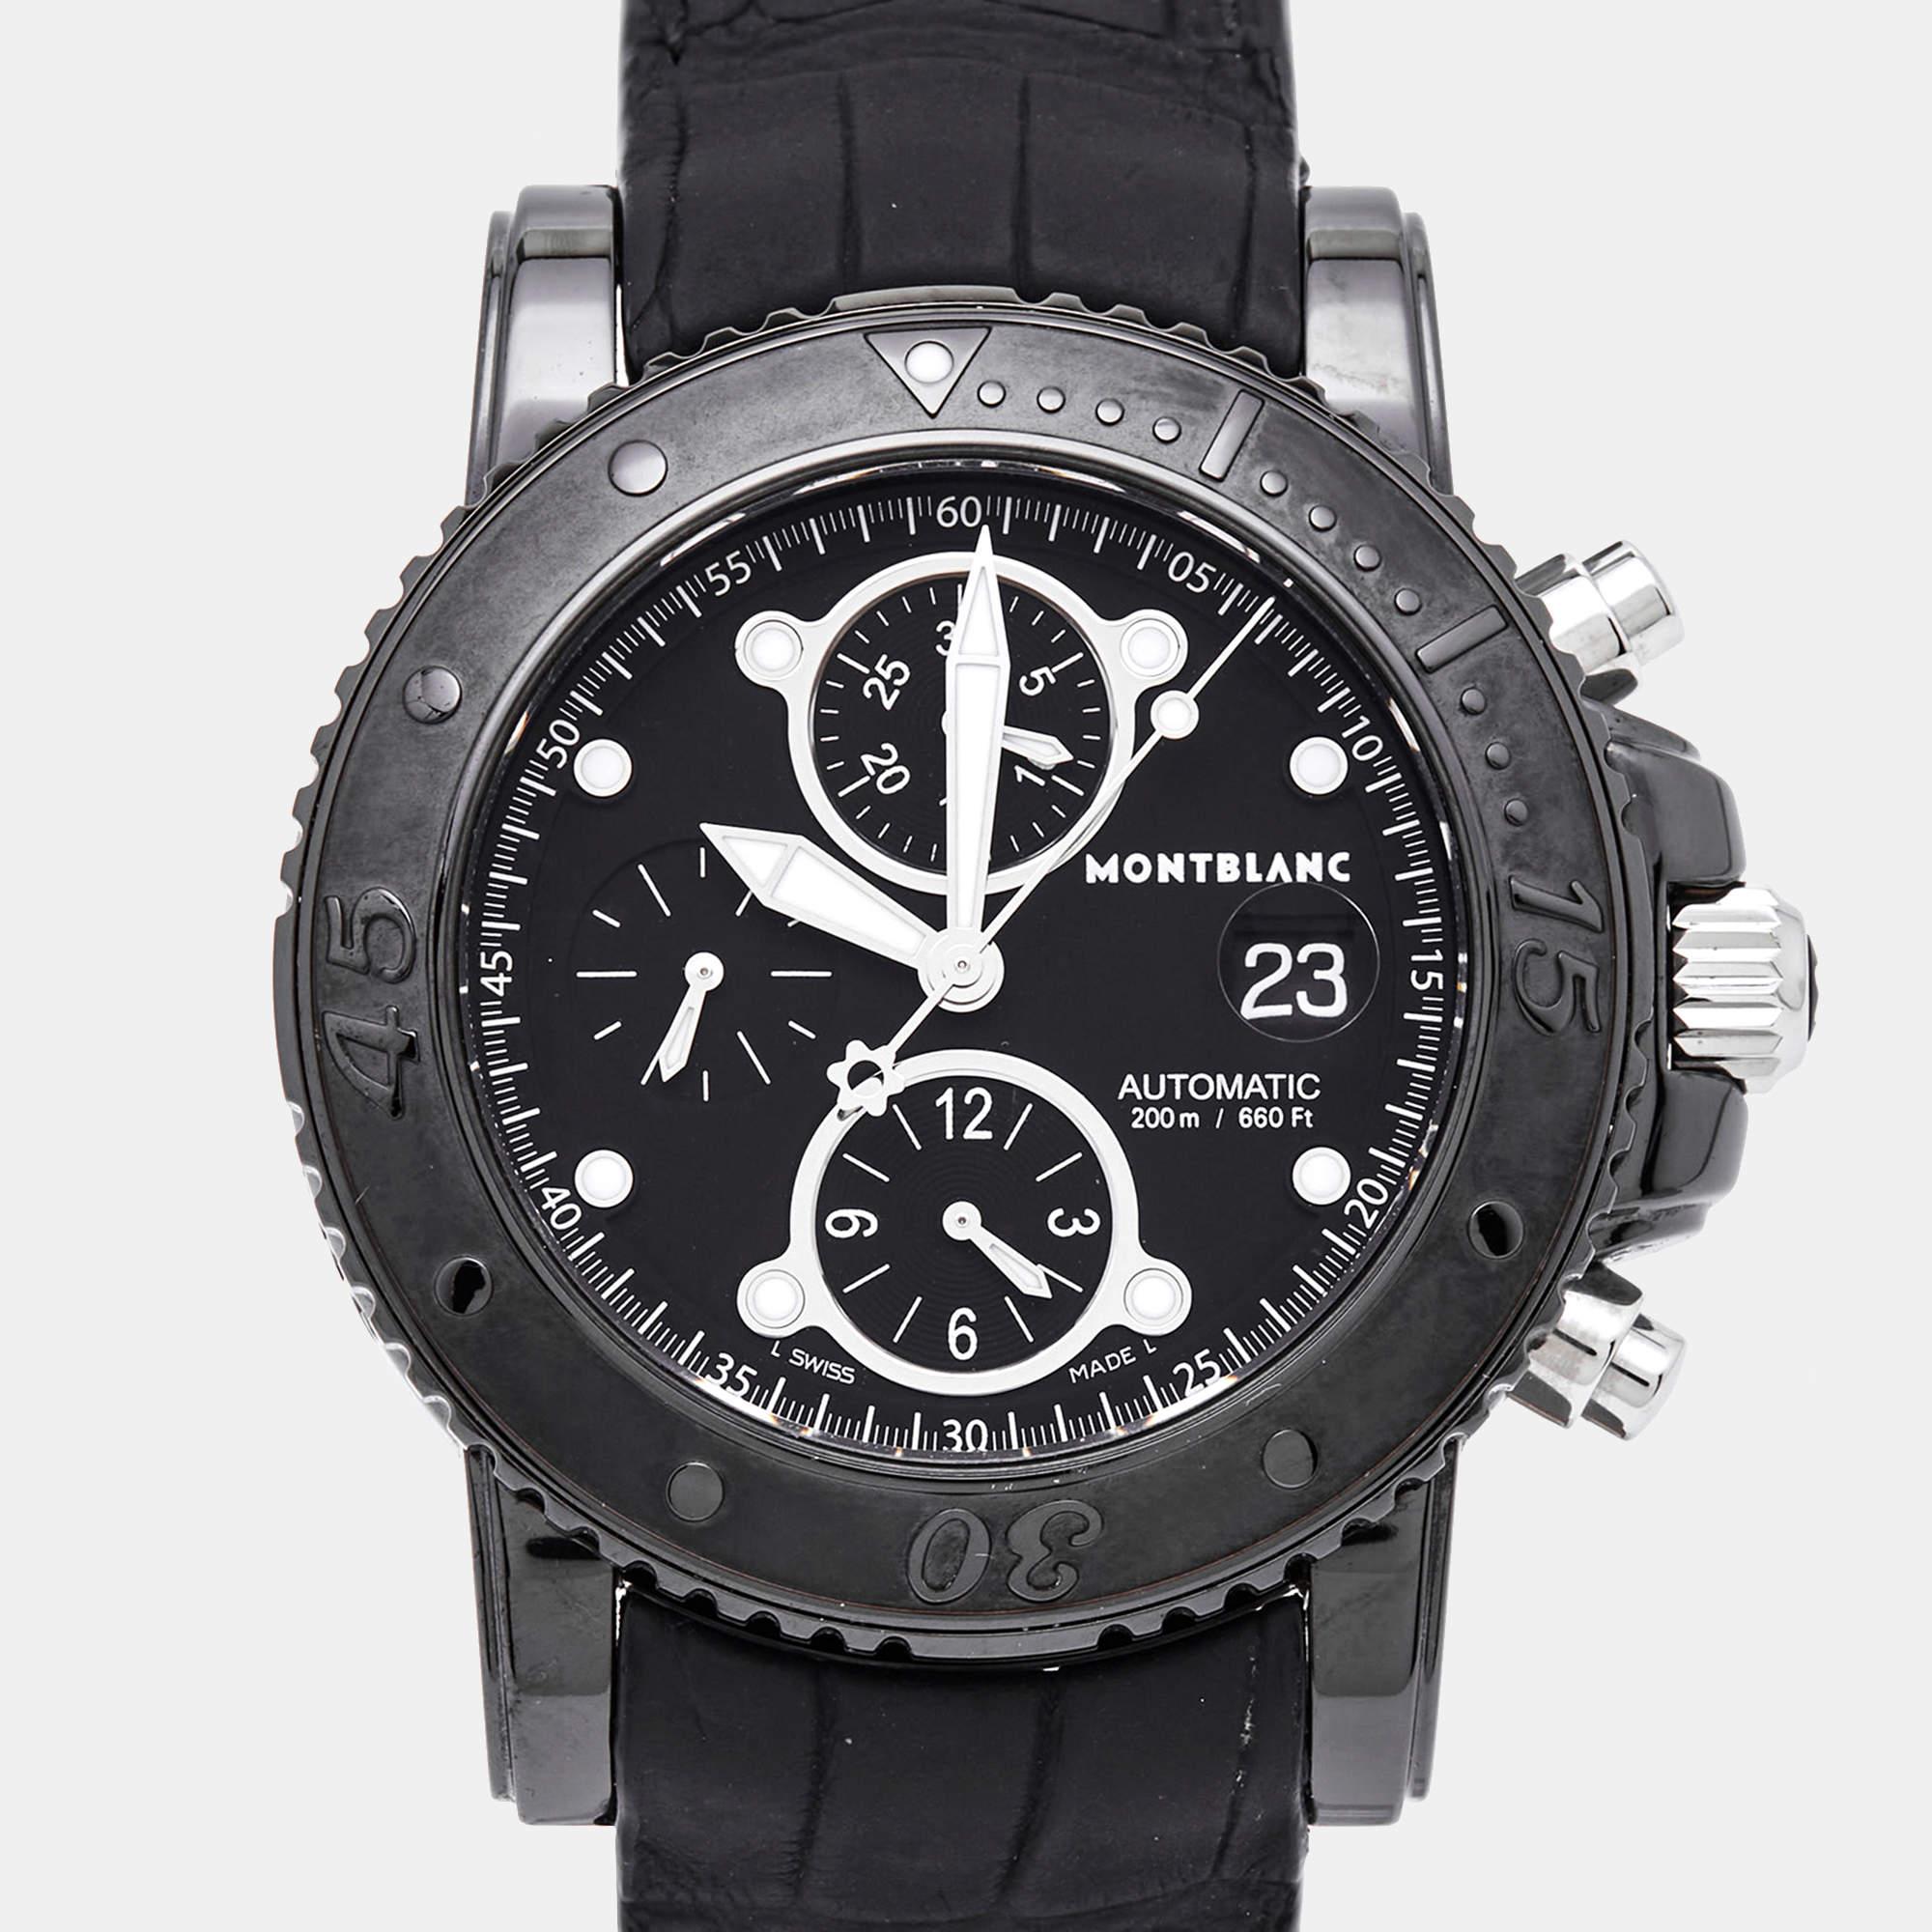 Aesthetic Movement Montblanc Black PVD Coated Alligator Leather Sport 104279 Men's Wristwatch 44 mm